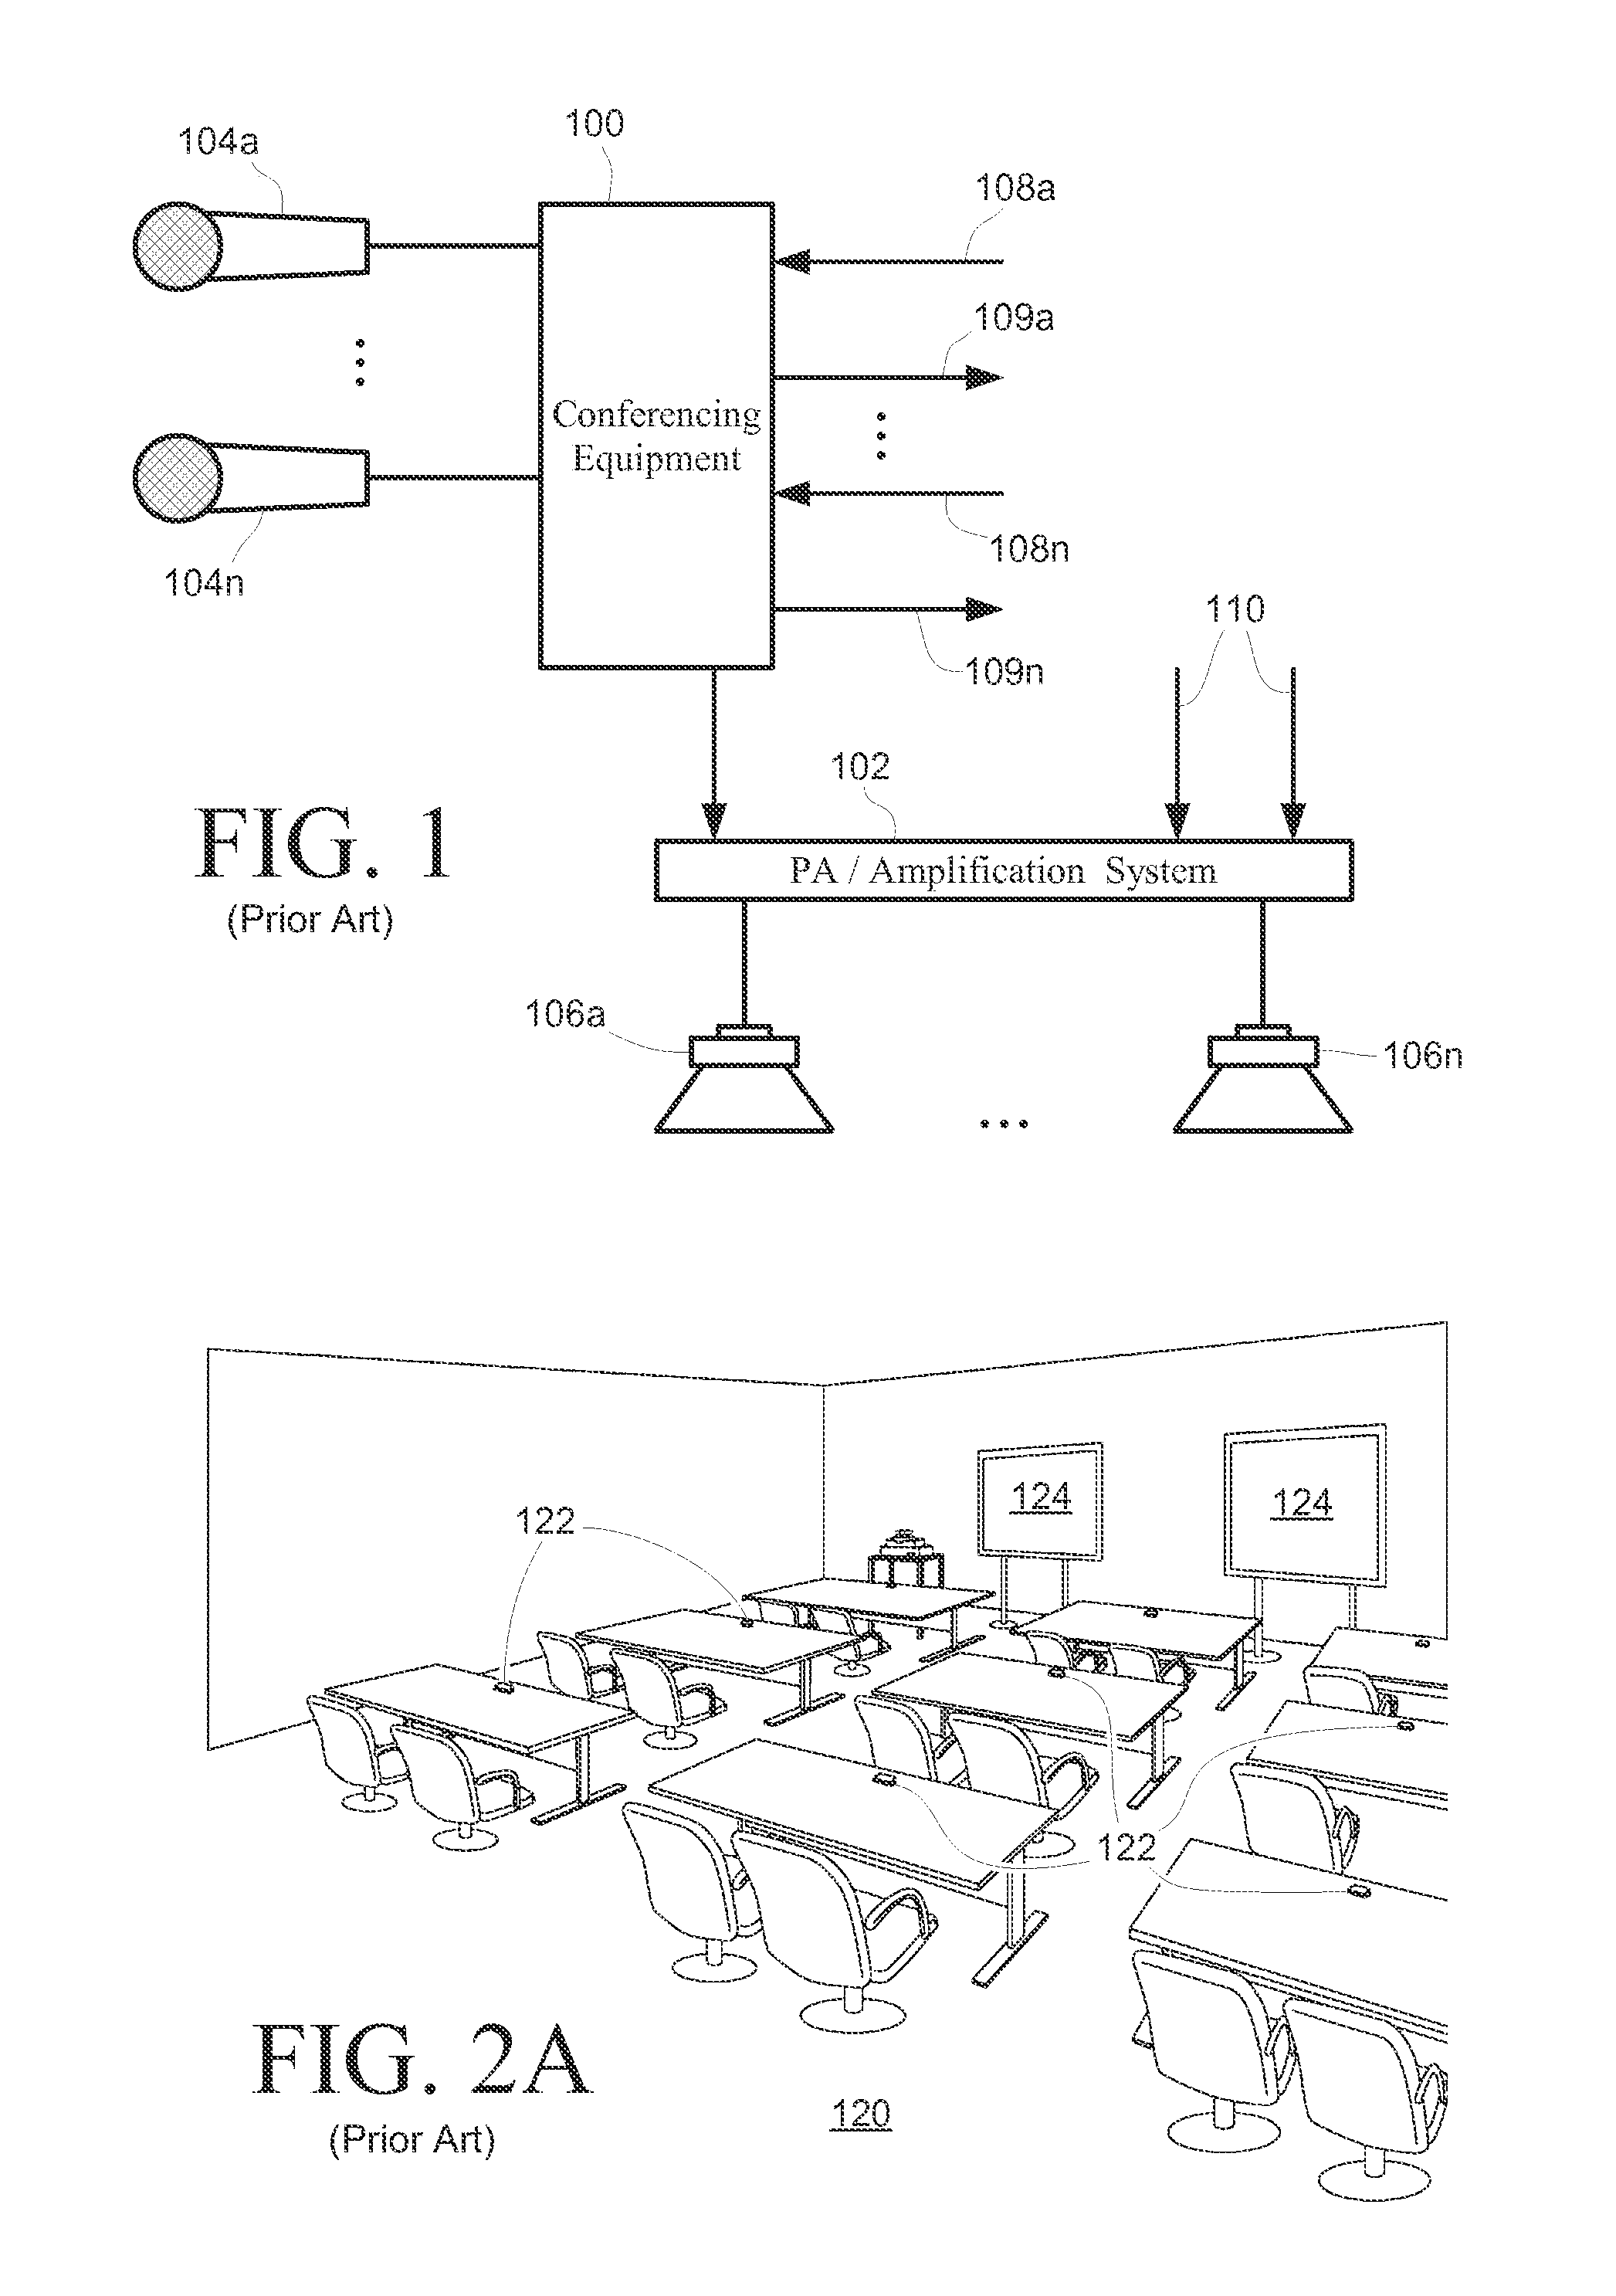 Conferencing system implementing echo cancellation and push-to-talk microphone detection using two-stage frequency filter